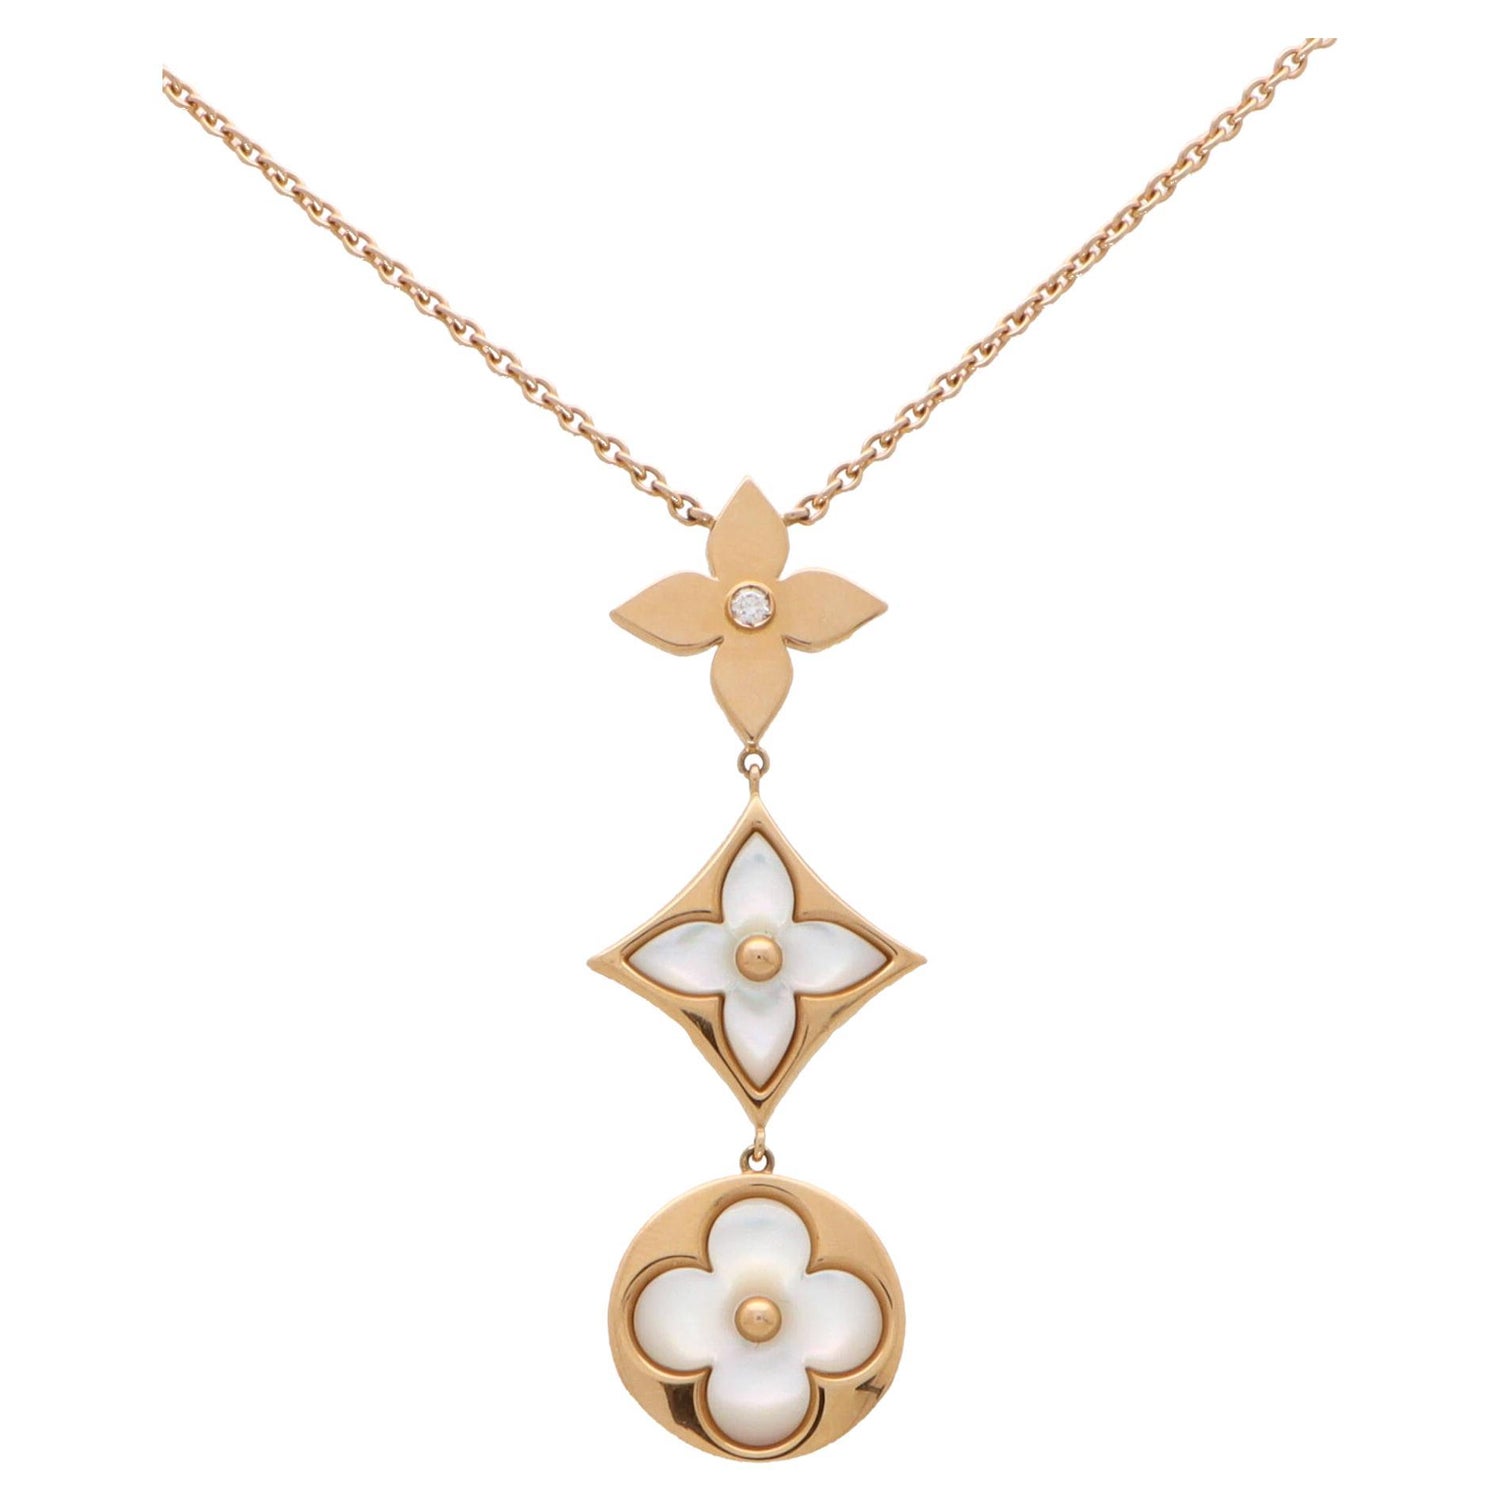 On the rocks: Louis Vuitton Blossom necklace